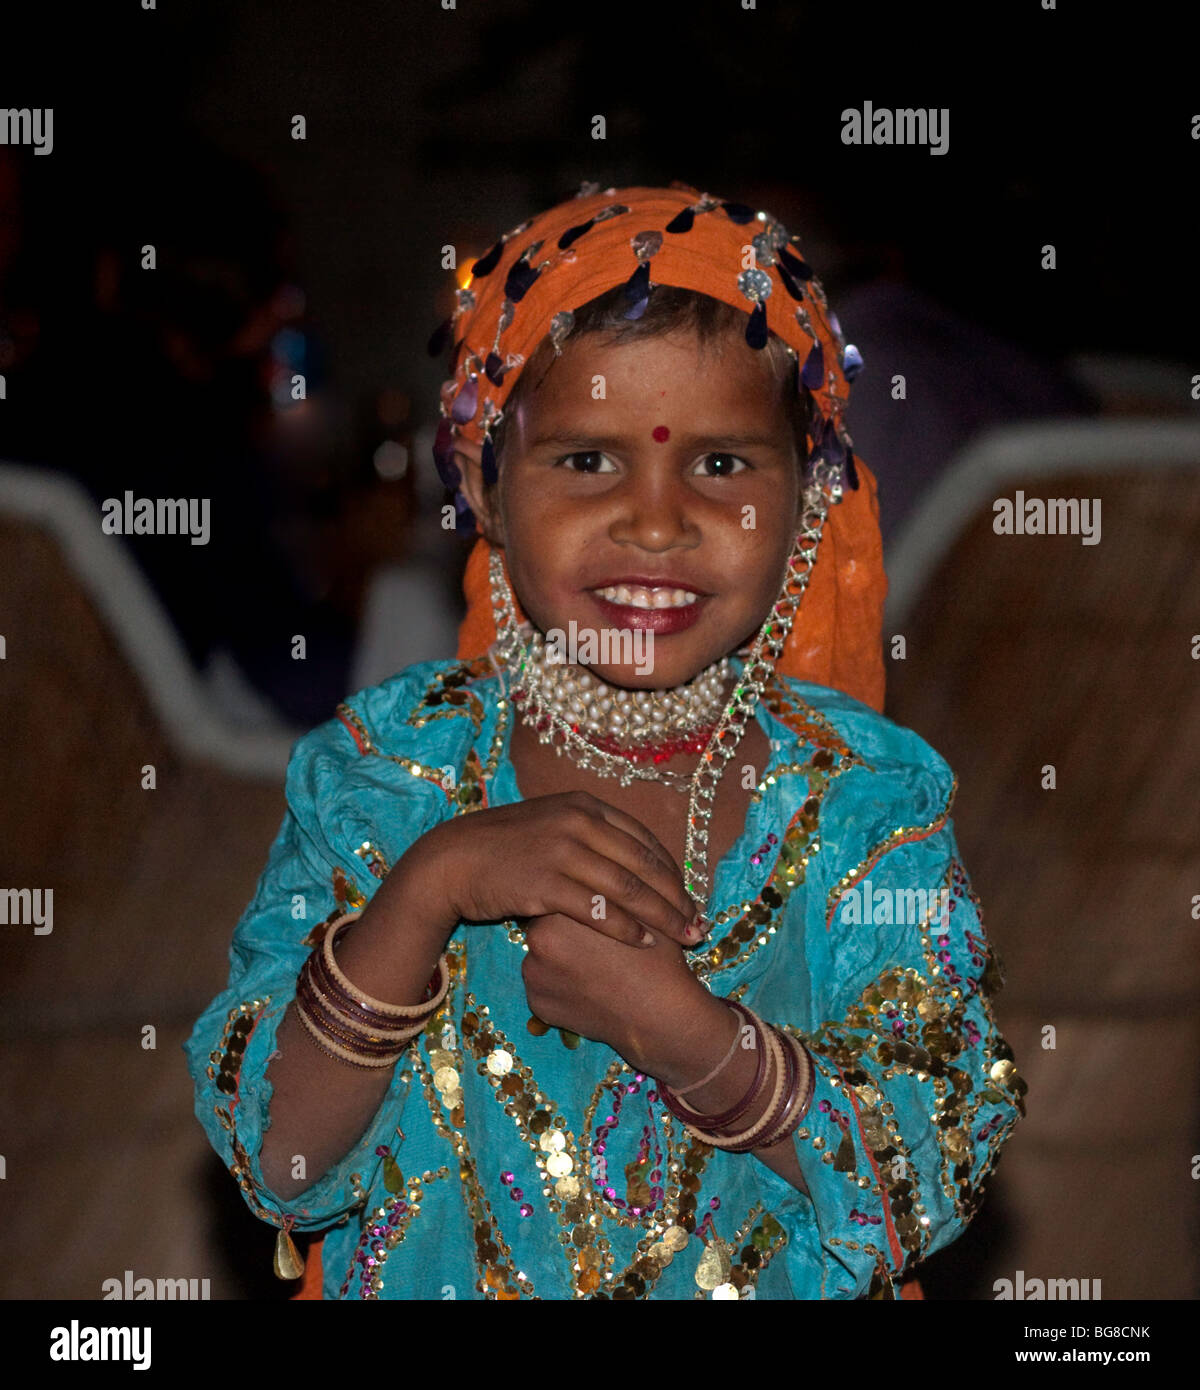 Young indian girl Stock Photo